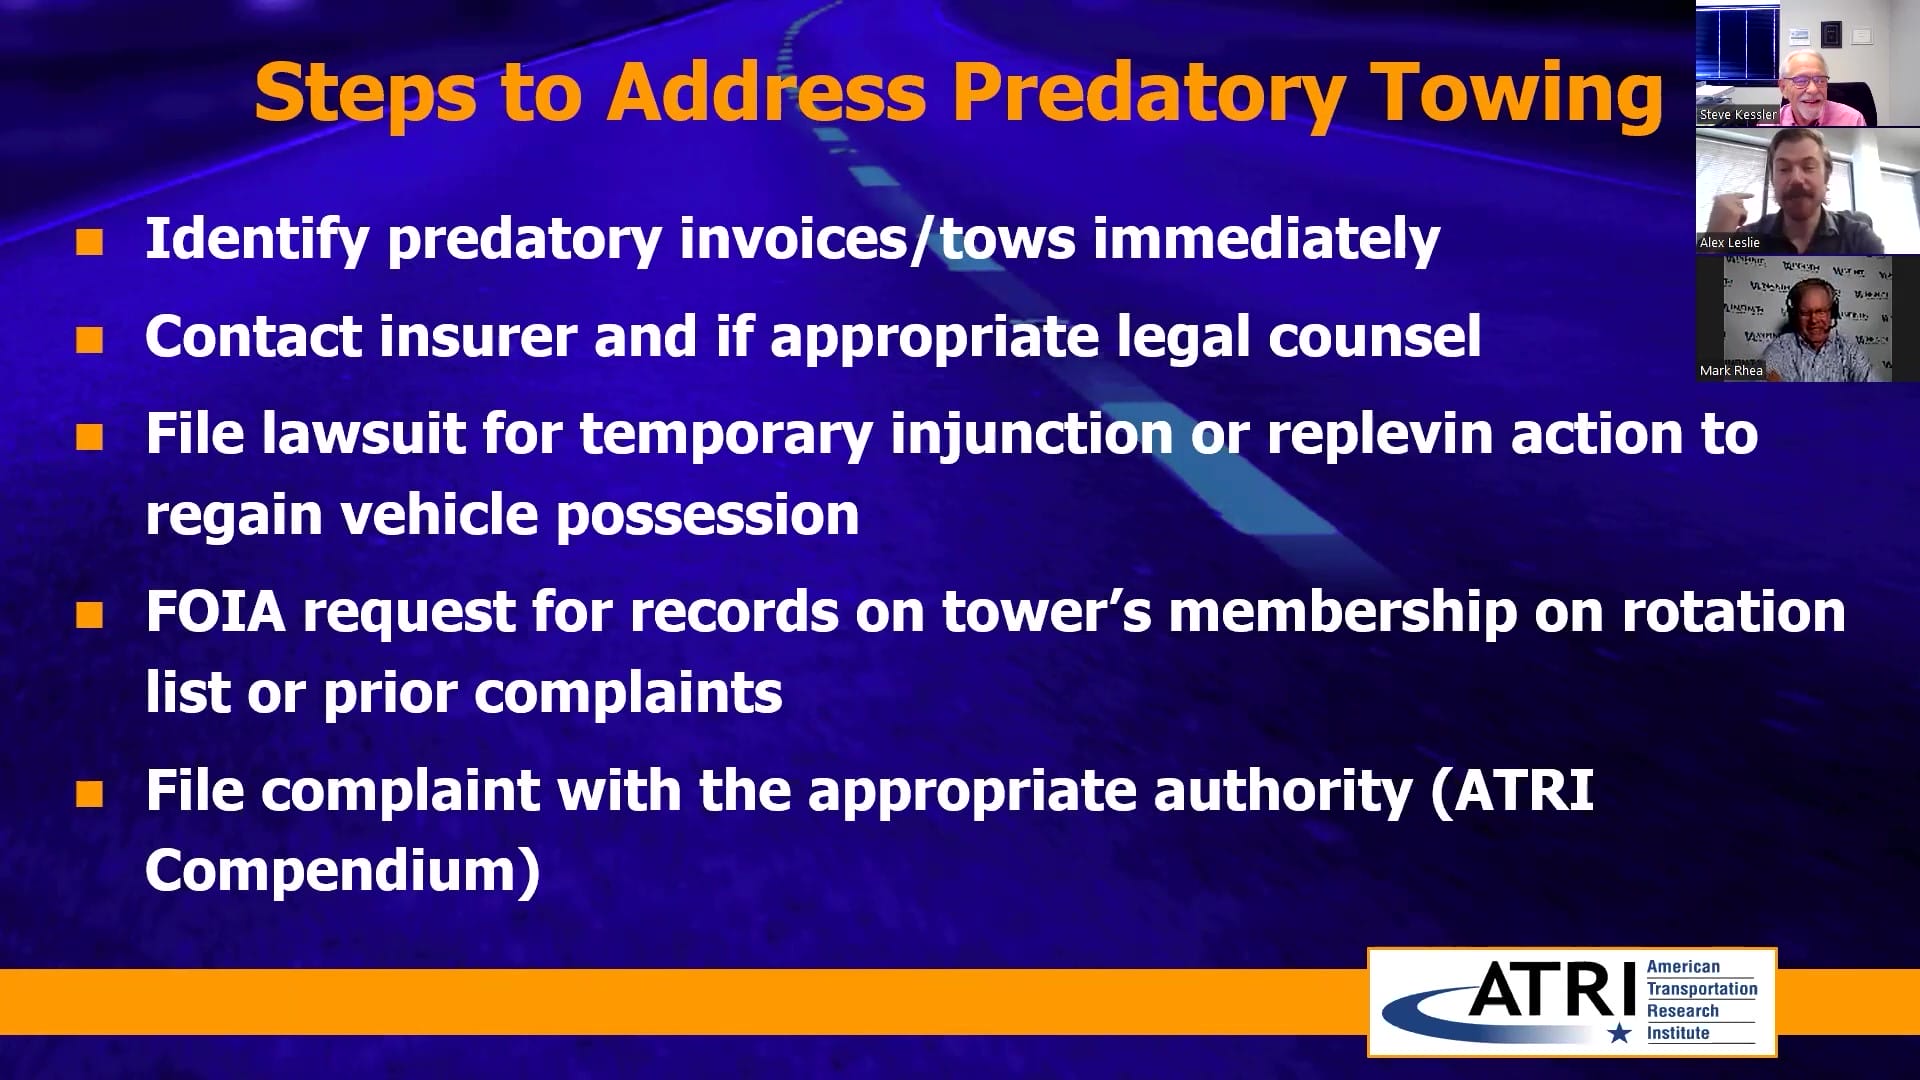 ATRI’s Research on Predatory Towing Steps to Address Predatory Towing